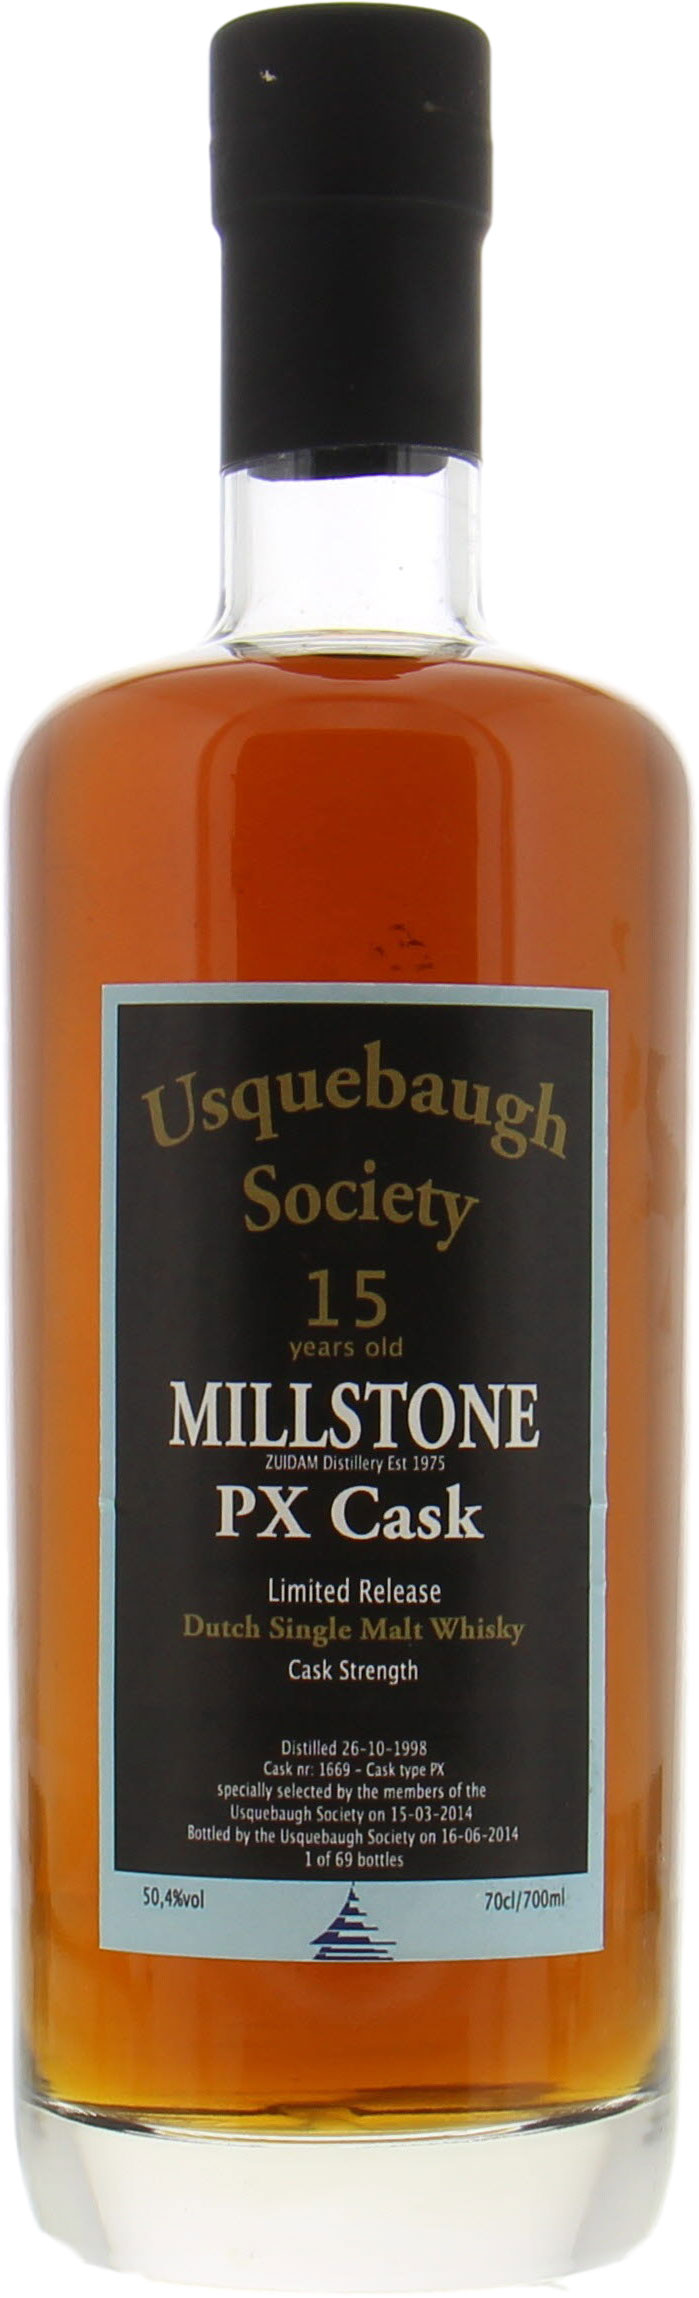 Millstone - 15 Years Old PX Cask 1669 Usquebaugh Society 50.4% 1998 Perfect